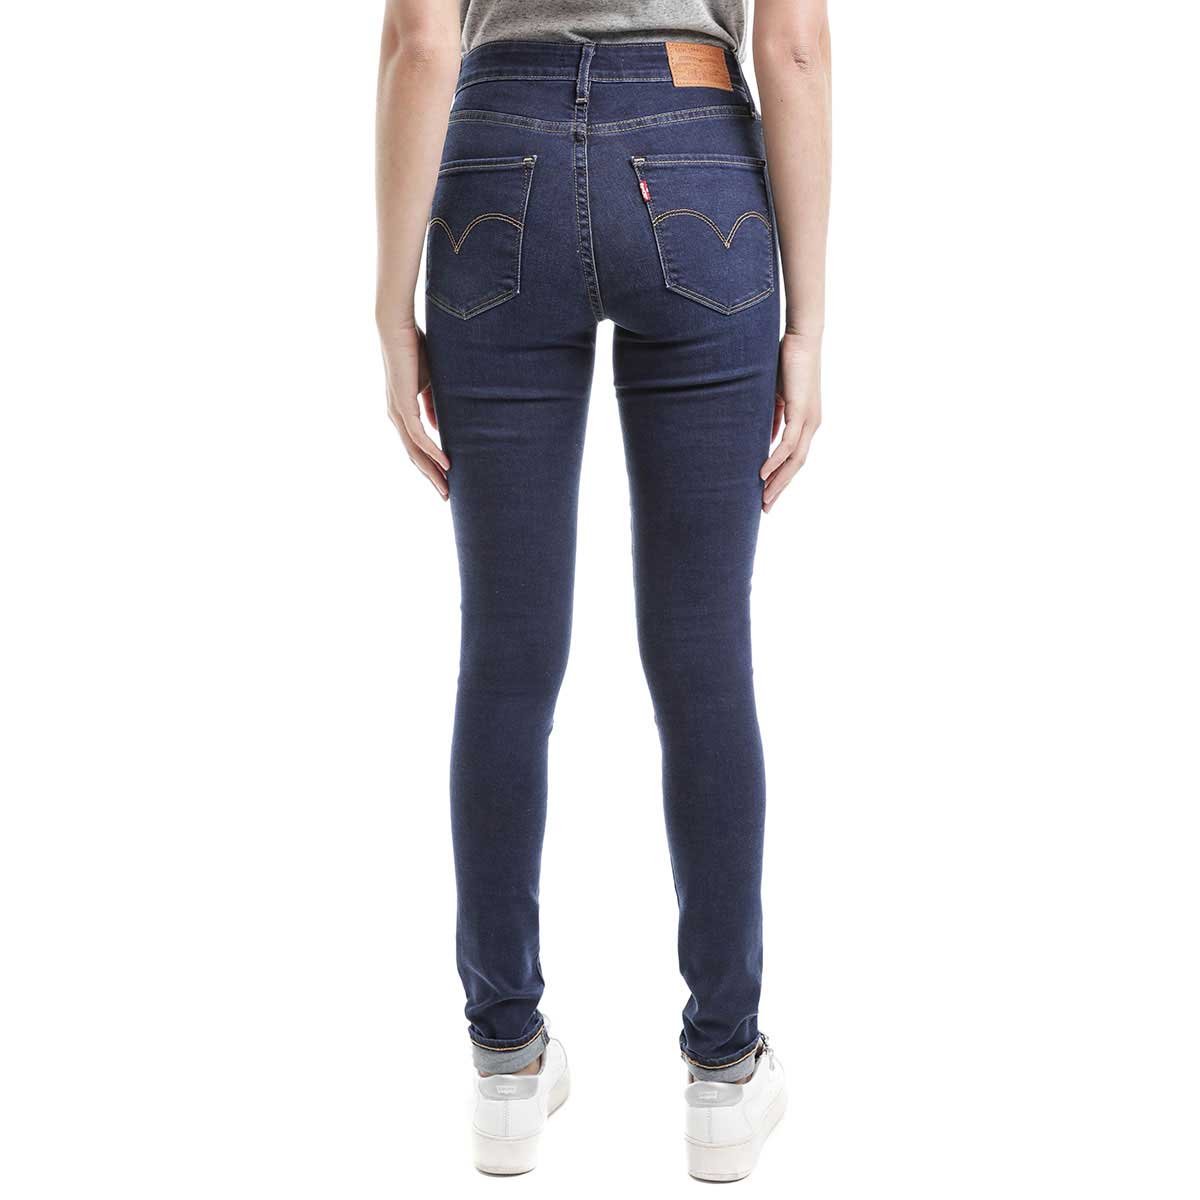 Jeans 721 High Rise Skinny Juniors Levis